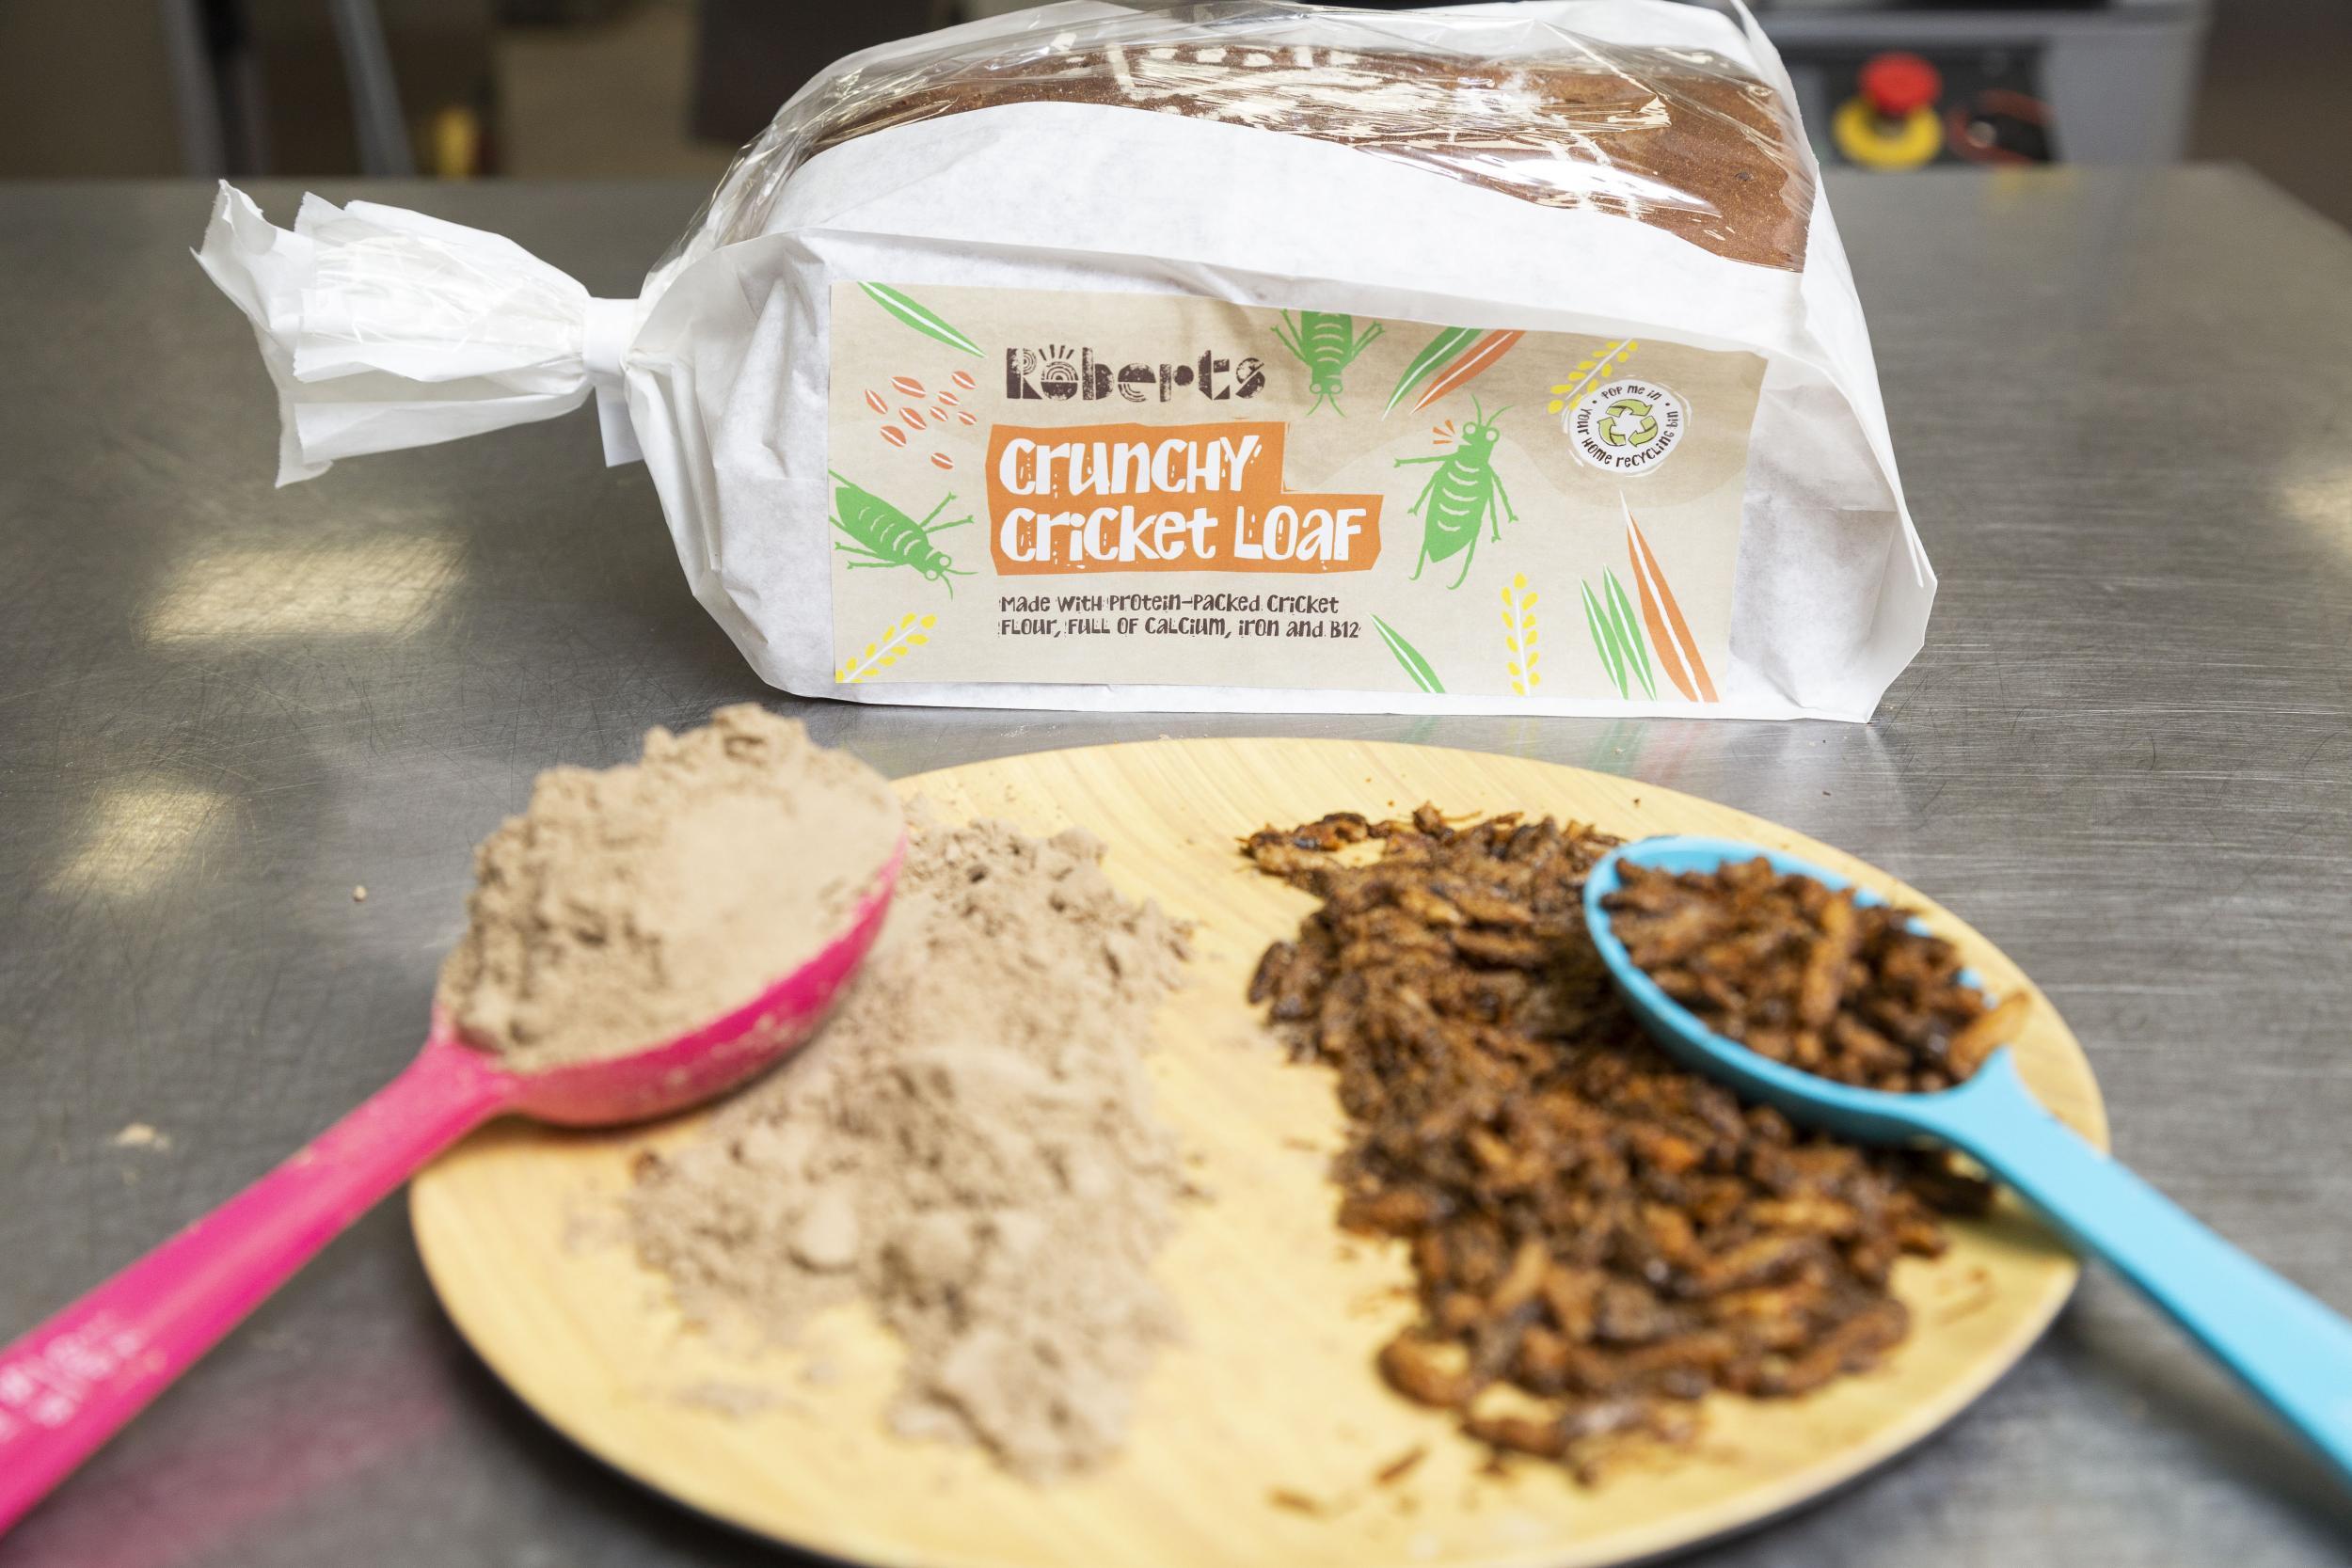 Each loaf of bread contains around 336 crickets (SWNS)